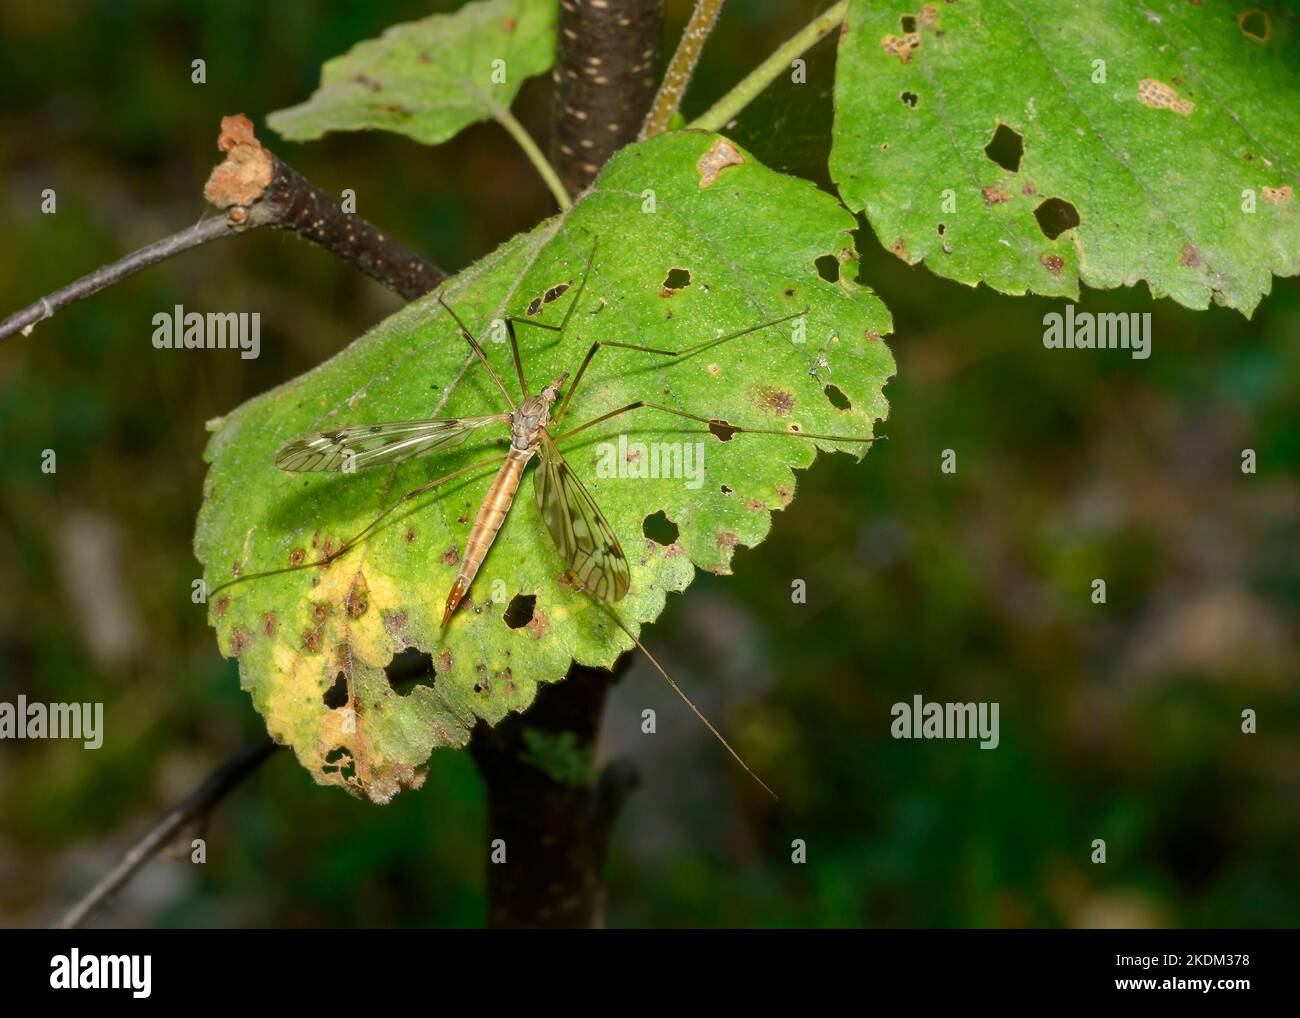 An insect with long legs, resembling a mosquito on a shrub branch Stock Photo